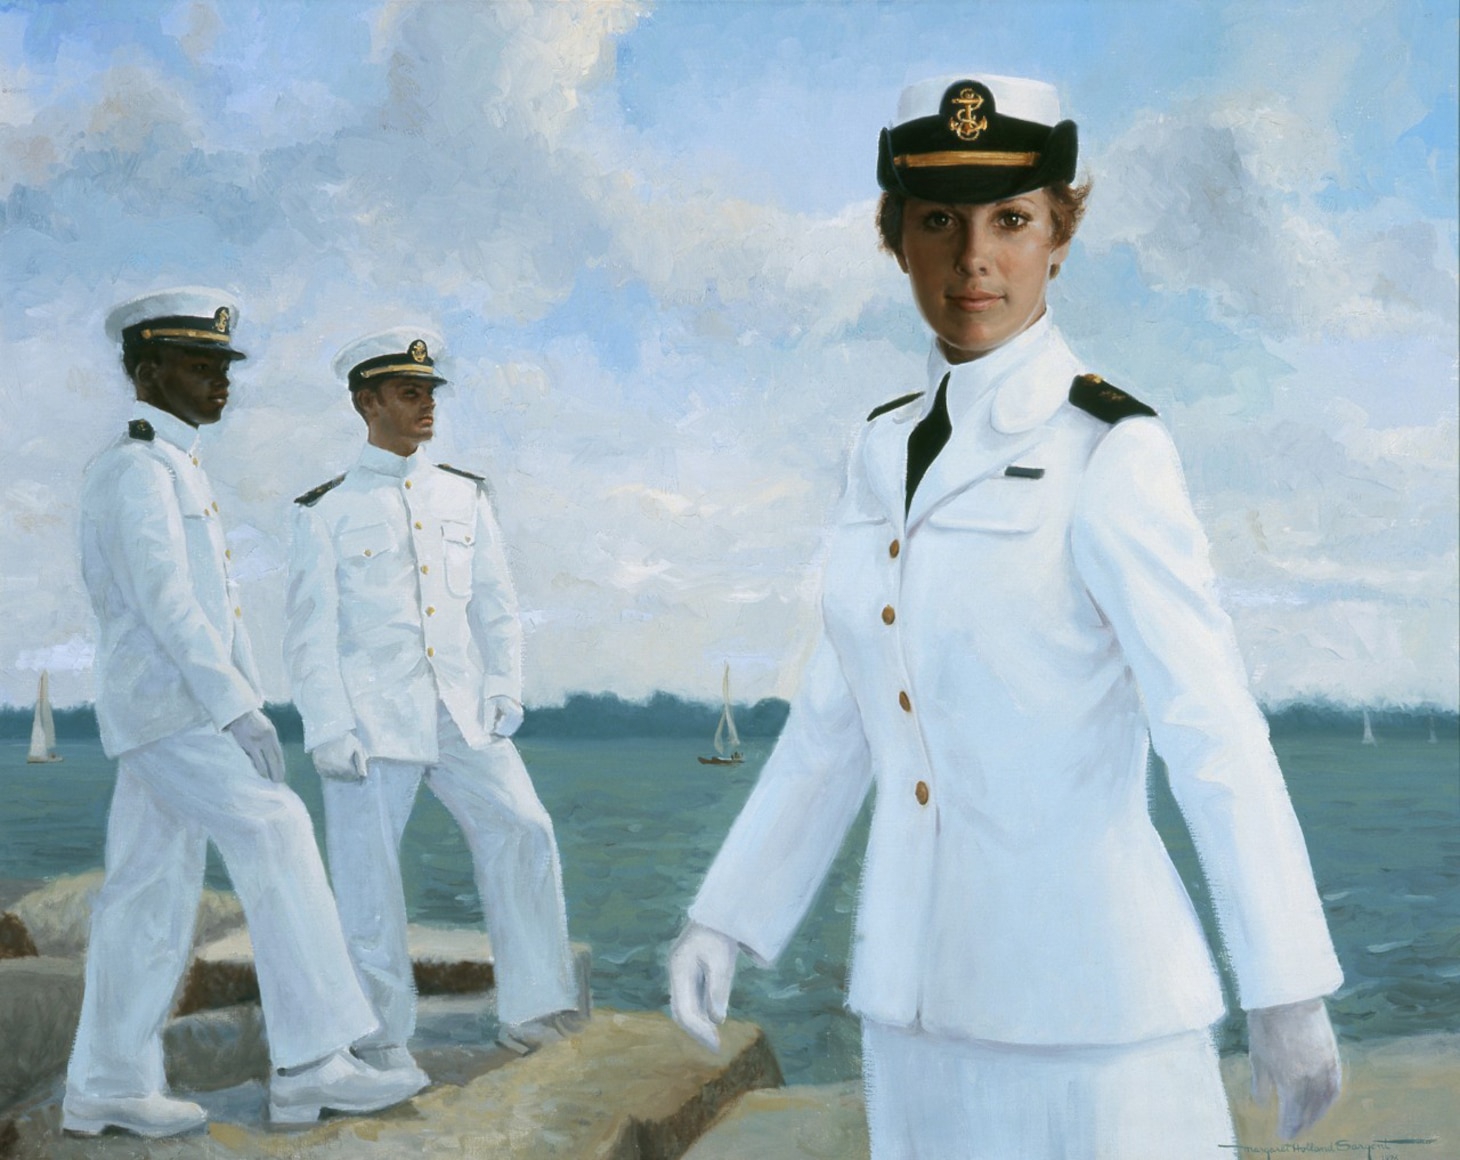 Sandra Irwin from San Francisco, California, became the first woman to enter the Naval Academy in the summer of 1976. She is depicted here with classmates Ray Damm and Carl B. Clark along the Severn River seawall. Oil on Canvas, Margaret Sargent. Image courtesy Naval History and Heritage Command (88-162-RT).